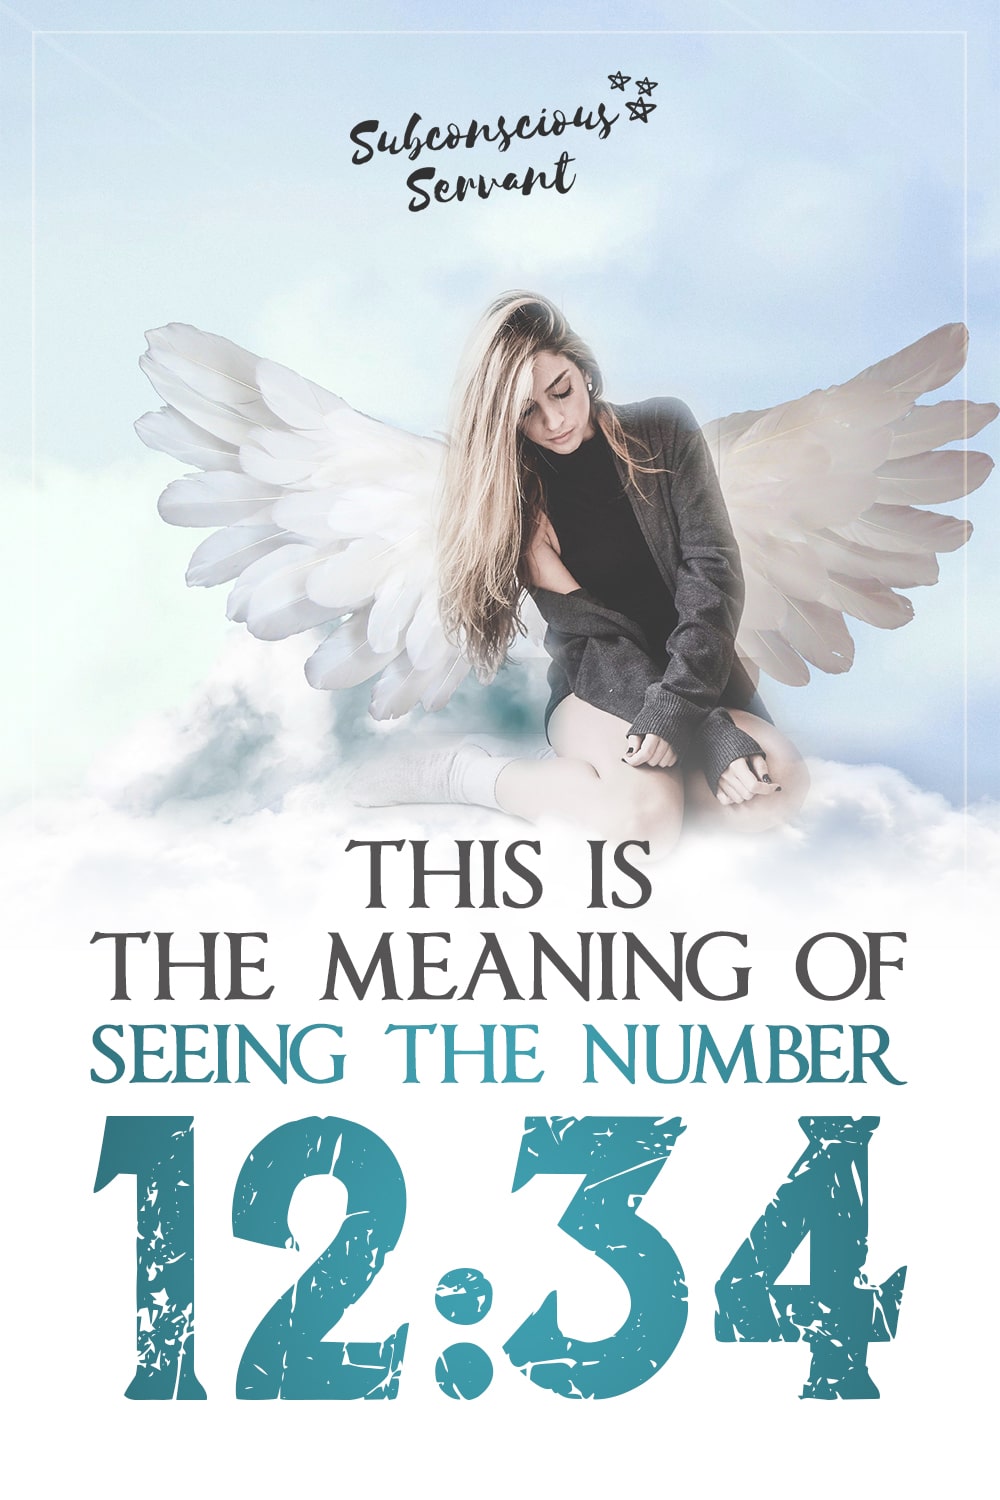 The Amazing Meaning Of Seeing 12:34 - What 1234 In Numerology Means